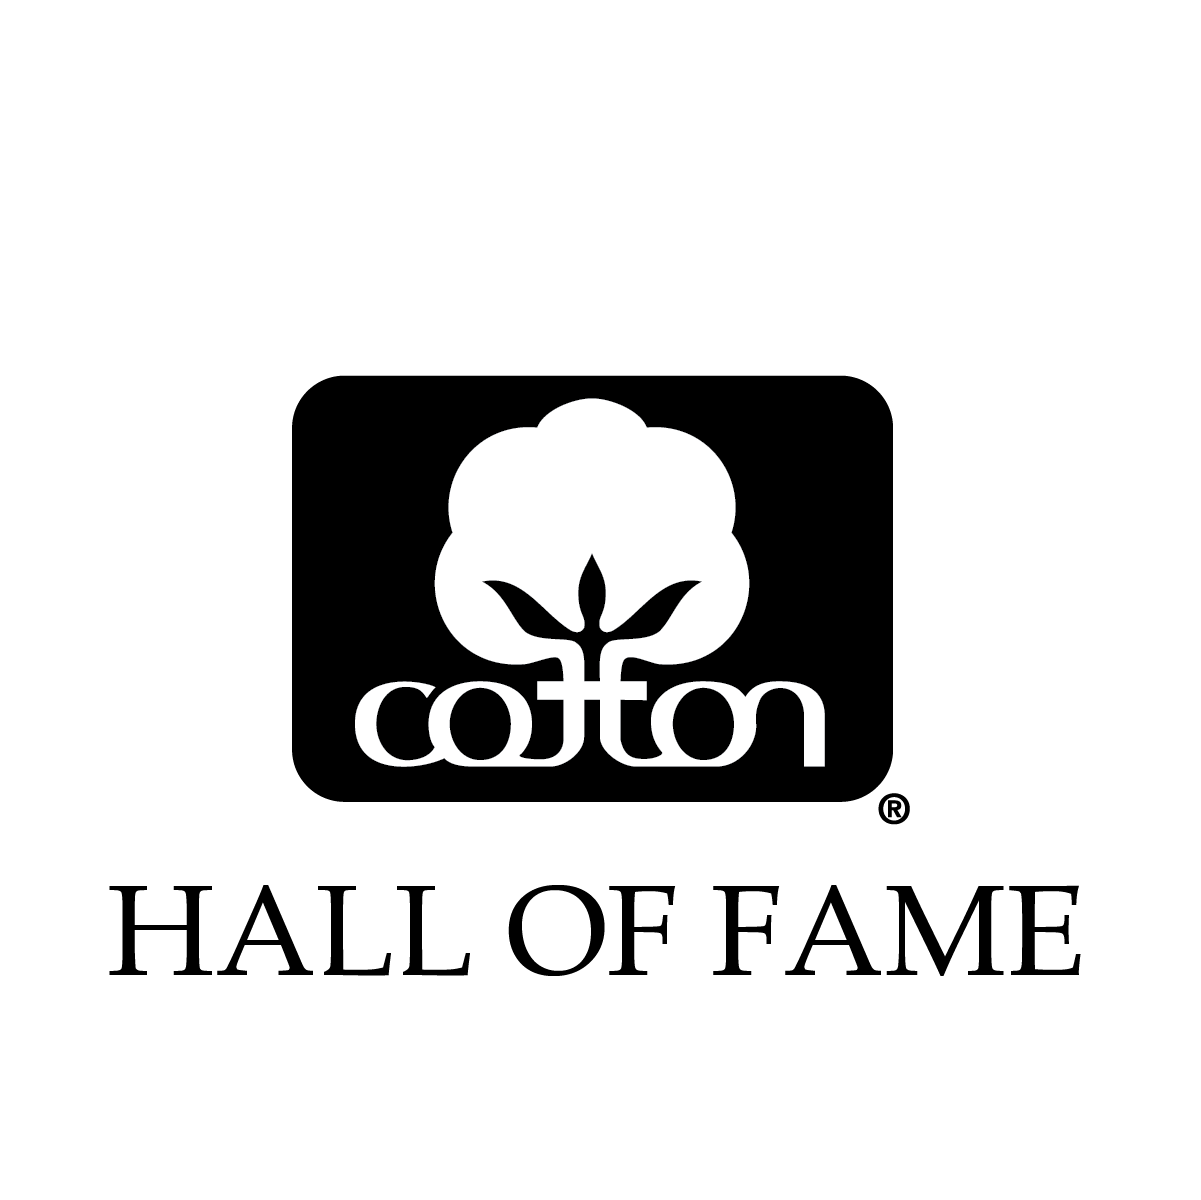 Cotton Seal Positive Negative HALLOFFAME - Cotton Research and Promotion Program Hall of Fame 2022 Inductees Announced